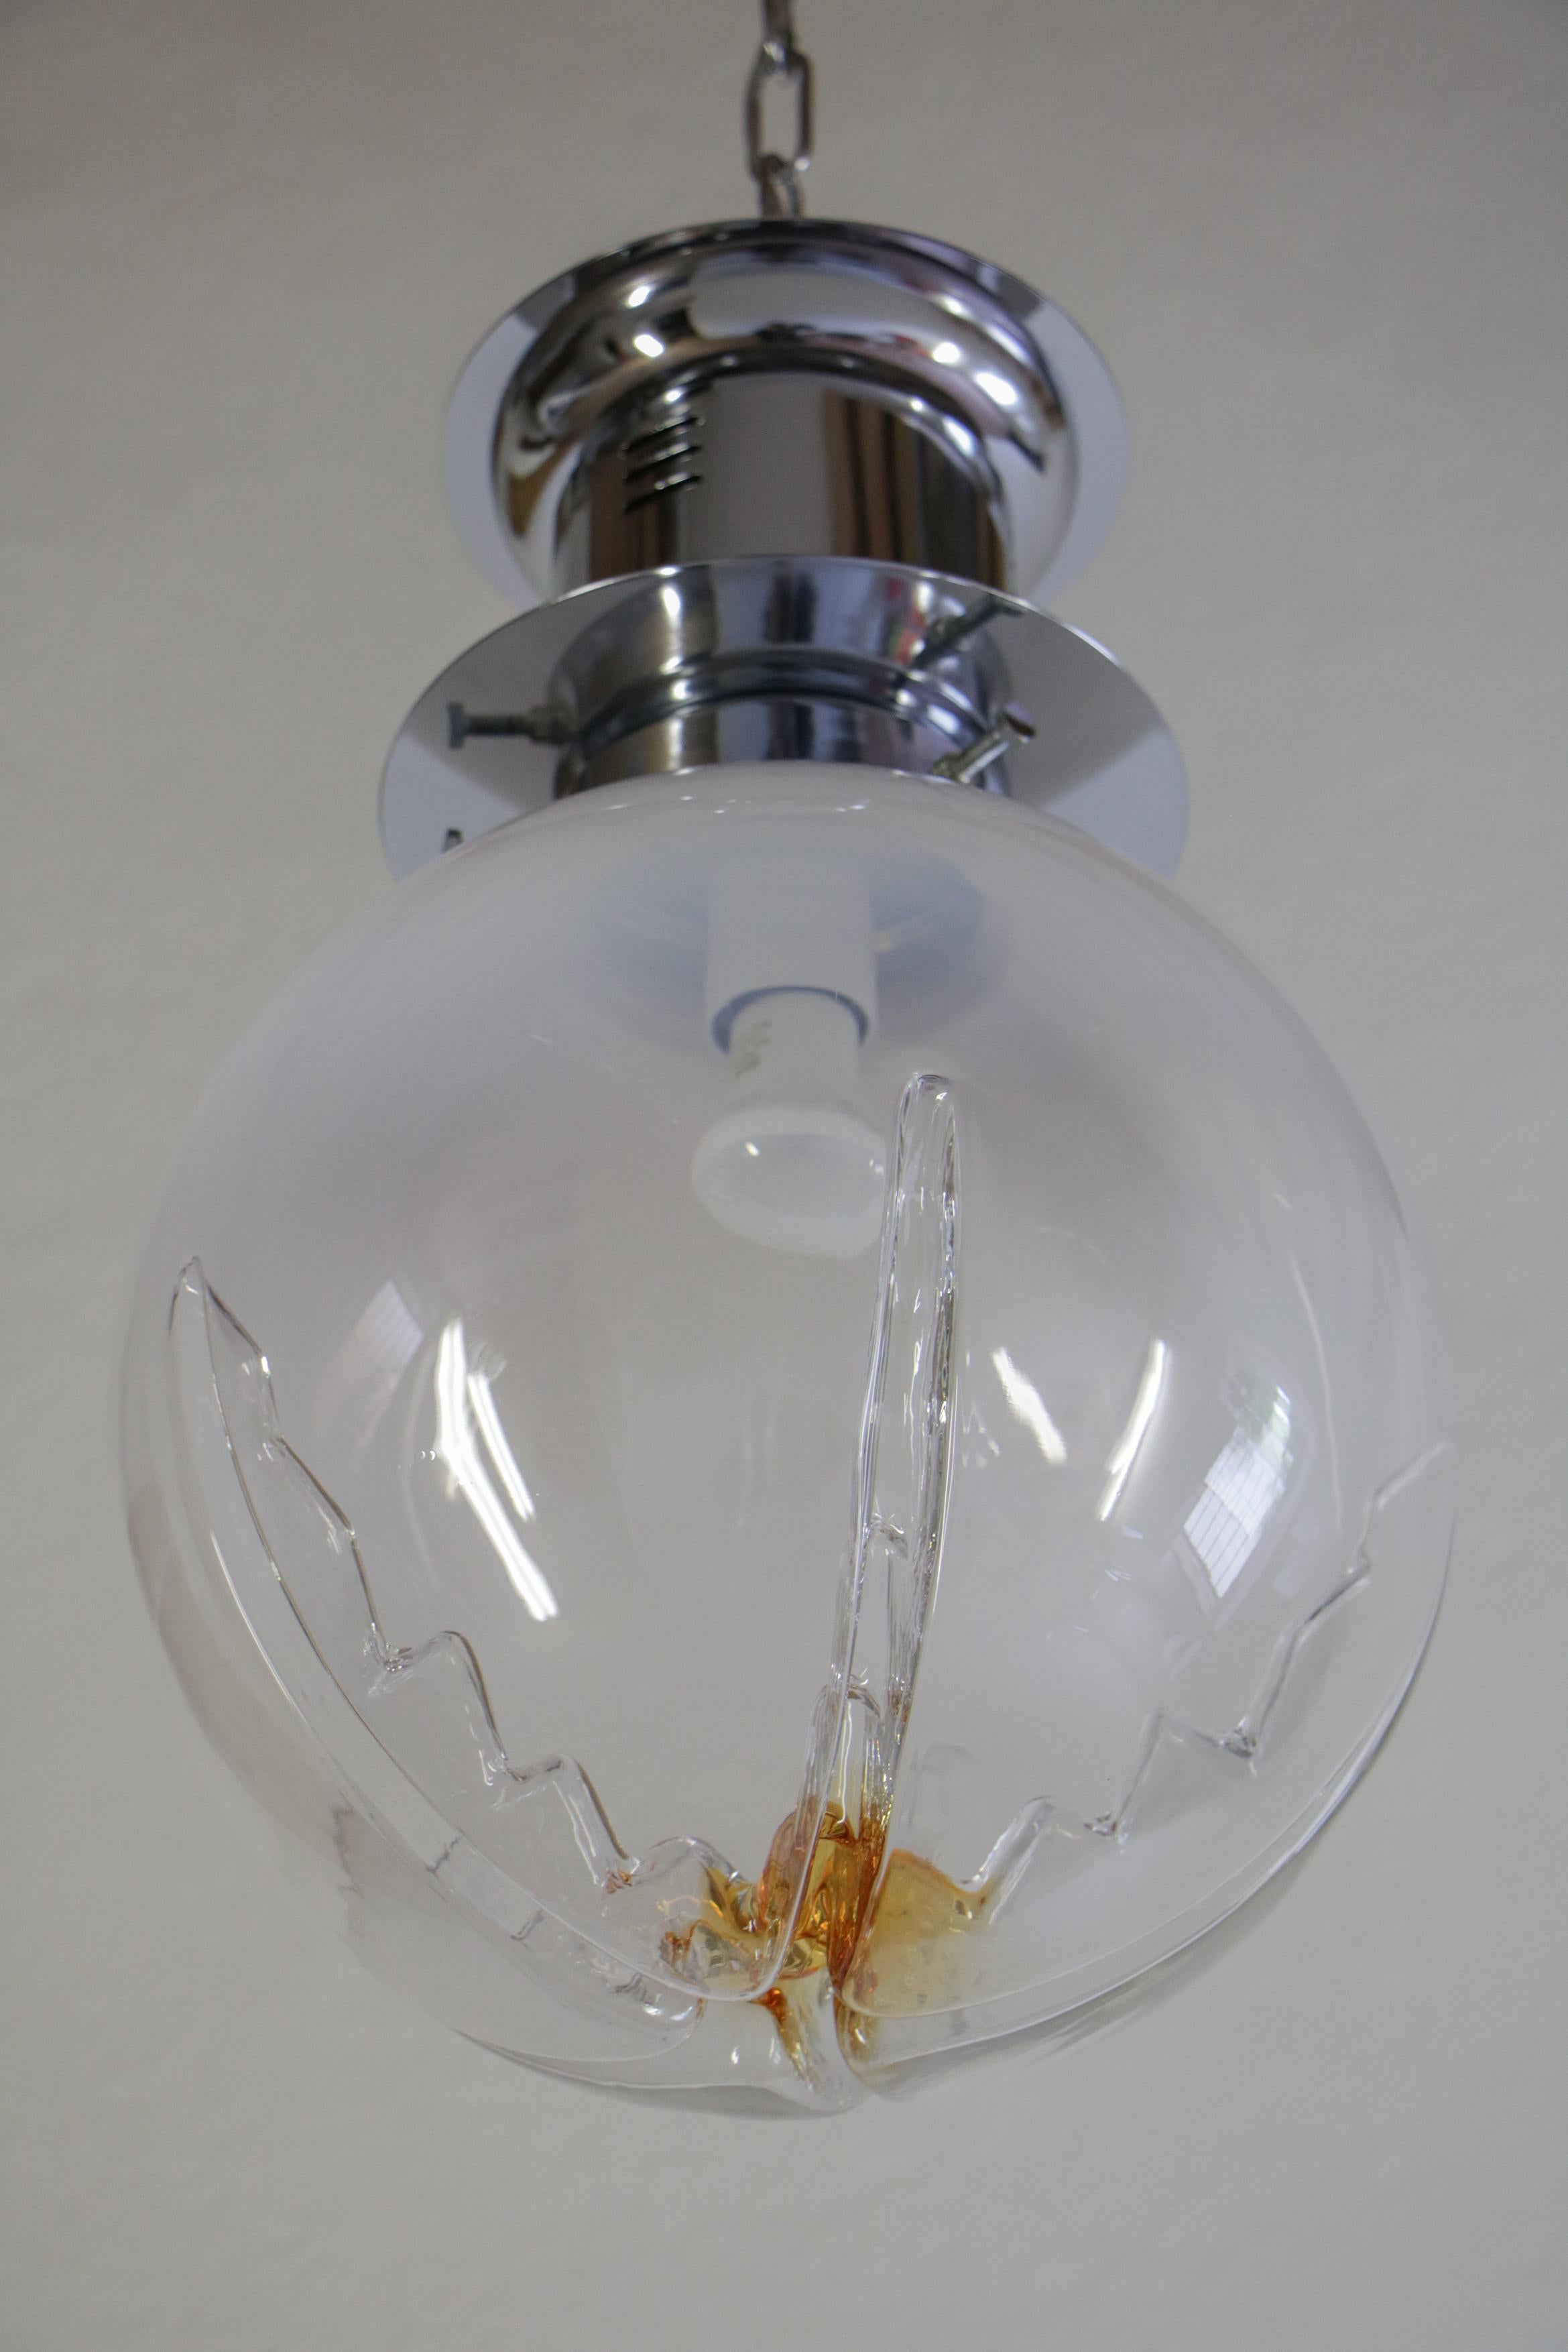 Aluminum Italian Space Age Ball Pendant Ceiling Lamp Attributed to Mazzega, 1970s For Sale